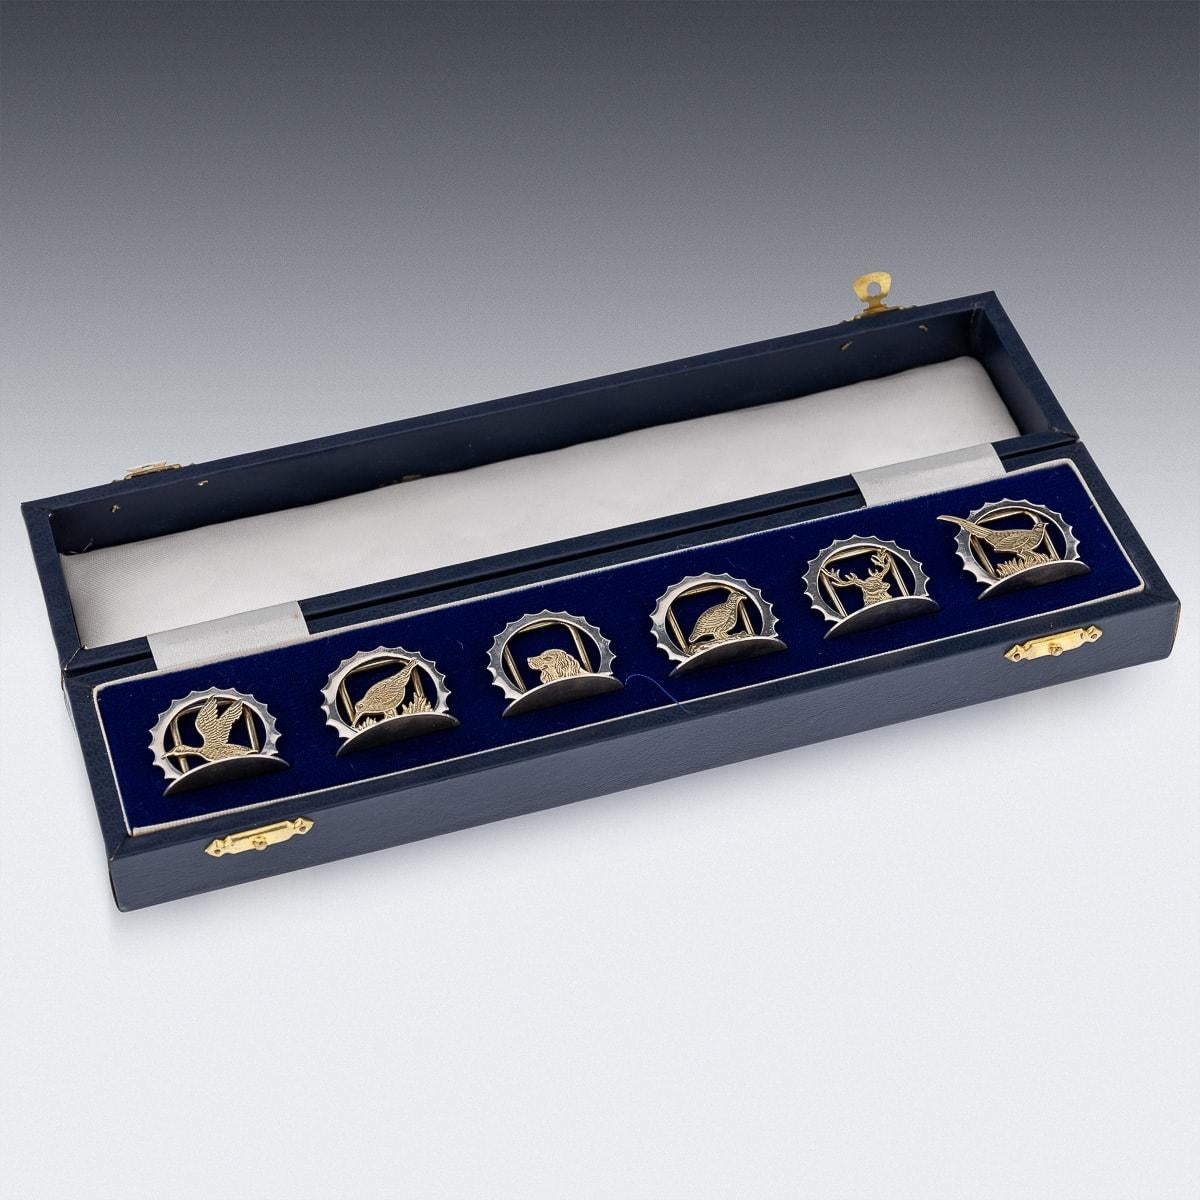 A superb late 20th Century solid silver set of six menu holders, each holder modelled as different gilt animals. Presented in the original box. Each menu holder is Hallmarked English silver (925 Standard), London, year 1987 (N), Maker's mark A